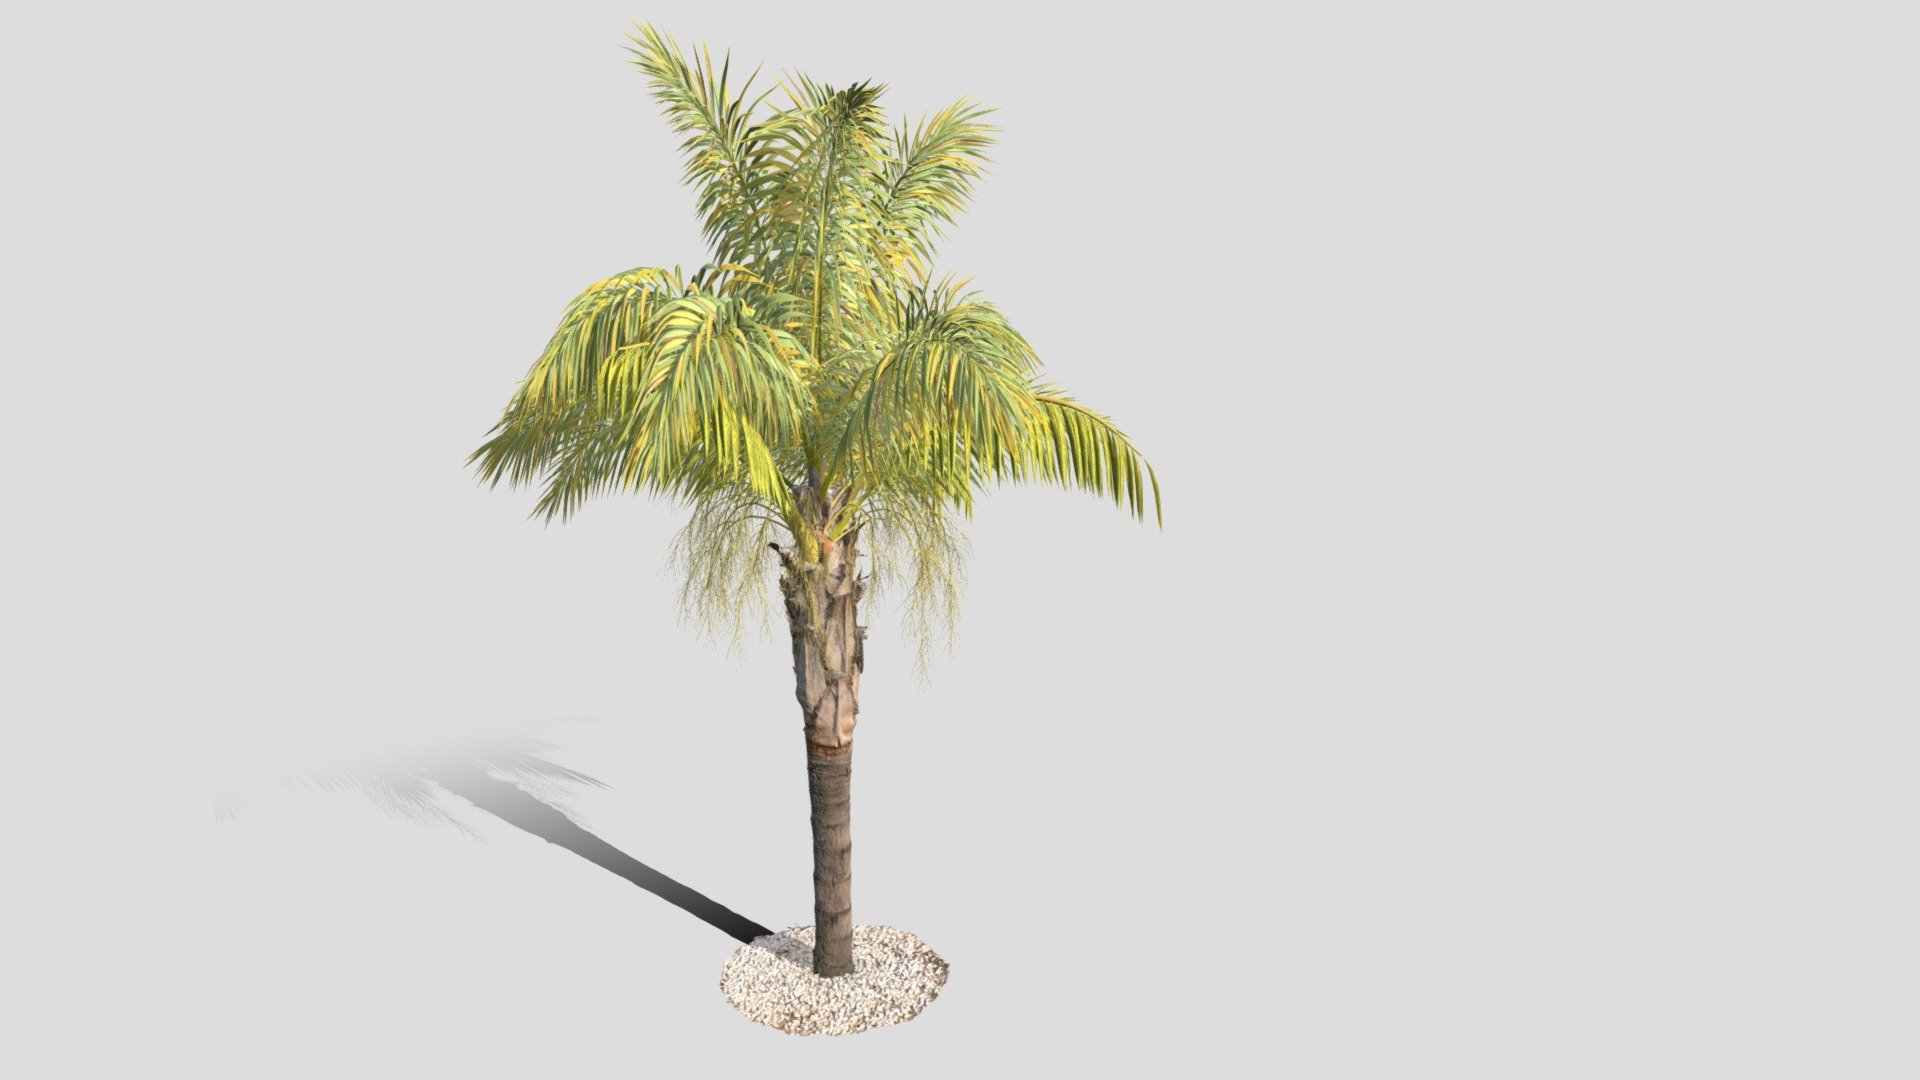 A high quality 3d model of a mid-size queen palm C (syagrus_romanzoffiana).

| Model features a scanned real tree parts for hyper-real renders

| Model dimensions : 5.3m5.87m7.8m

| Mesh details – 771,765 faces , 438,819 vertices

| It comes with PBR ready textures - Diffuse, Albedo, AO, Metalness /Specular, Normal, Roughness maps. Other formats available upon request.

| Formats 3ds max 2015 with a Vray materials FBX ABC Clarisse OBJ

Object suitable for architectural and landscape visualisations and presentations. Please let us know, if we can improve our models or if you need us to adapt to specific needs!

We take custom orders for specific species!

Find more assets on Gobotree.com! - GTV queen palm mid size C - Buy Royalty Free 3D model by Gobotree-3D-Assets 3d model